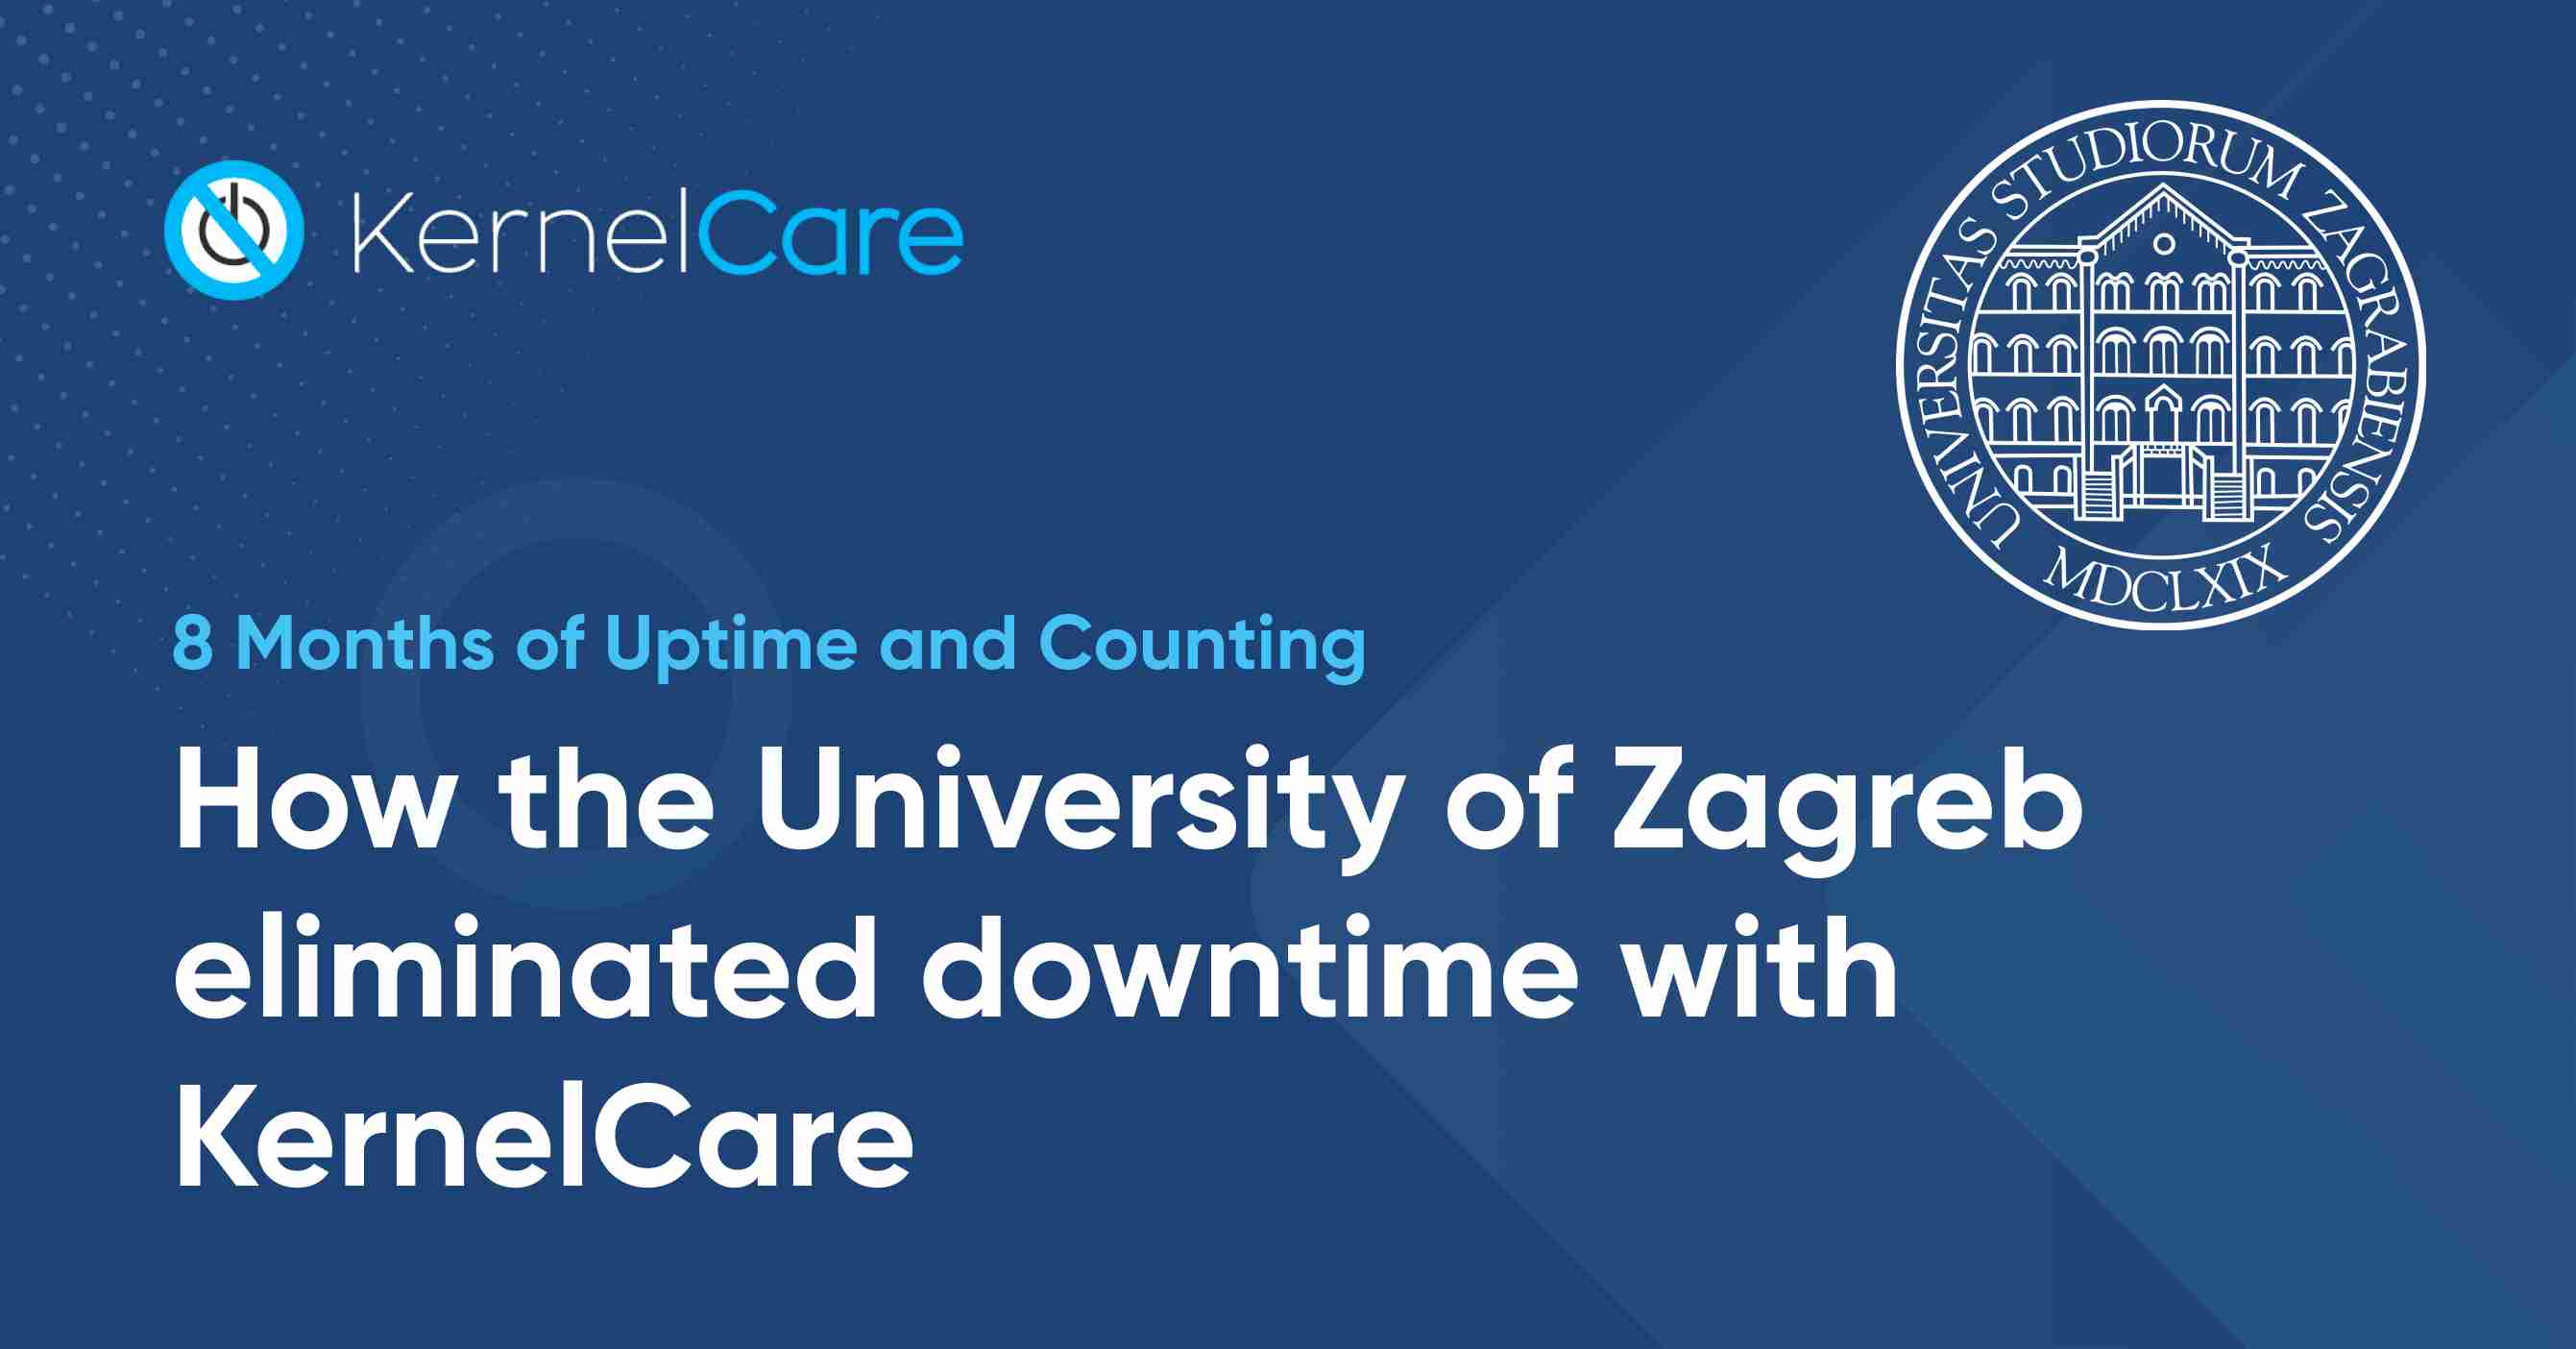 Case Study: University of Zagreb eliminated downtime with KernelCare